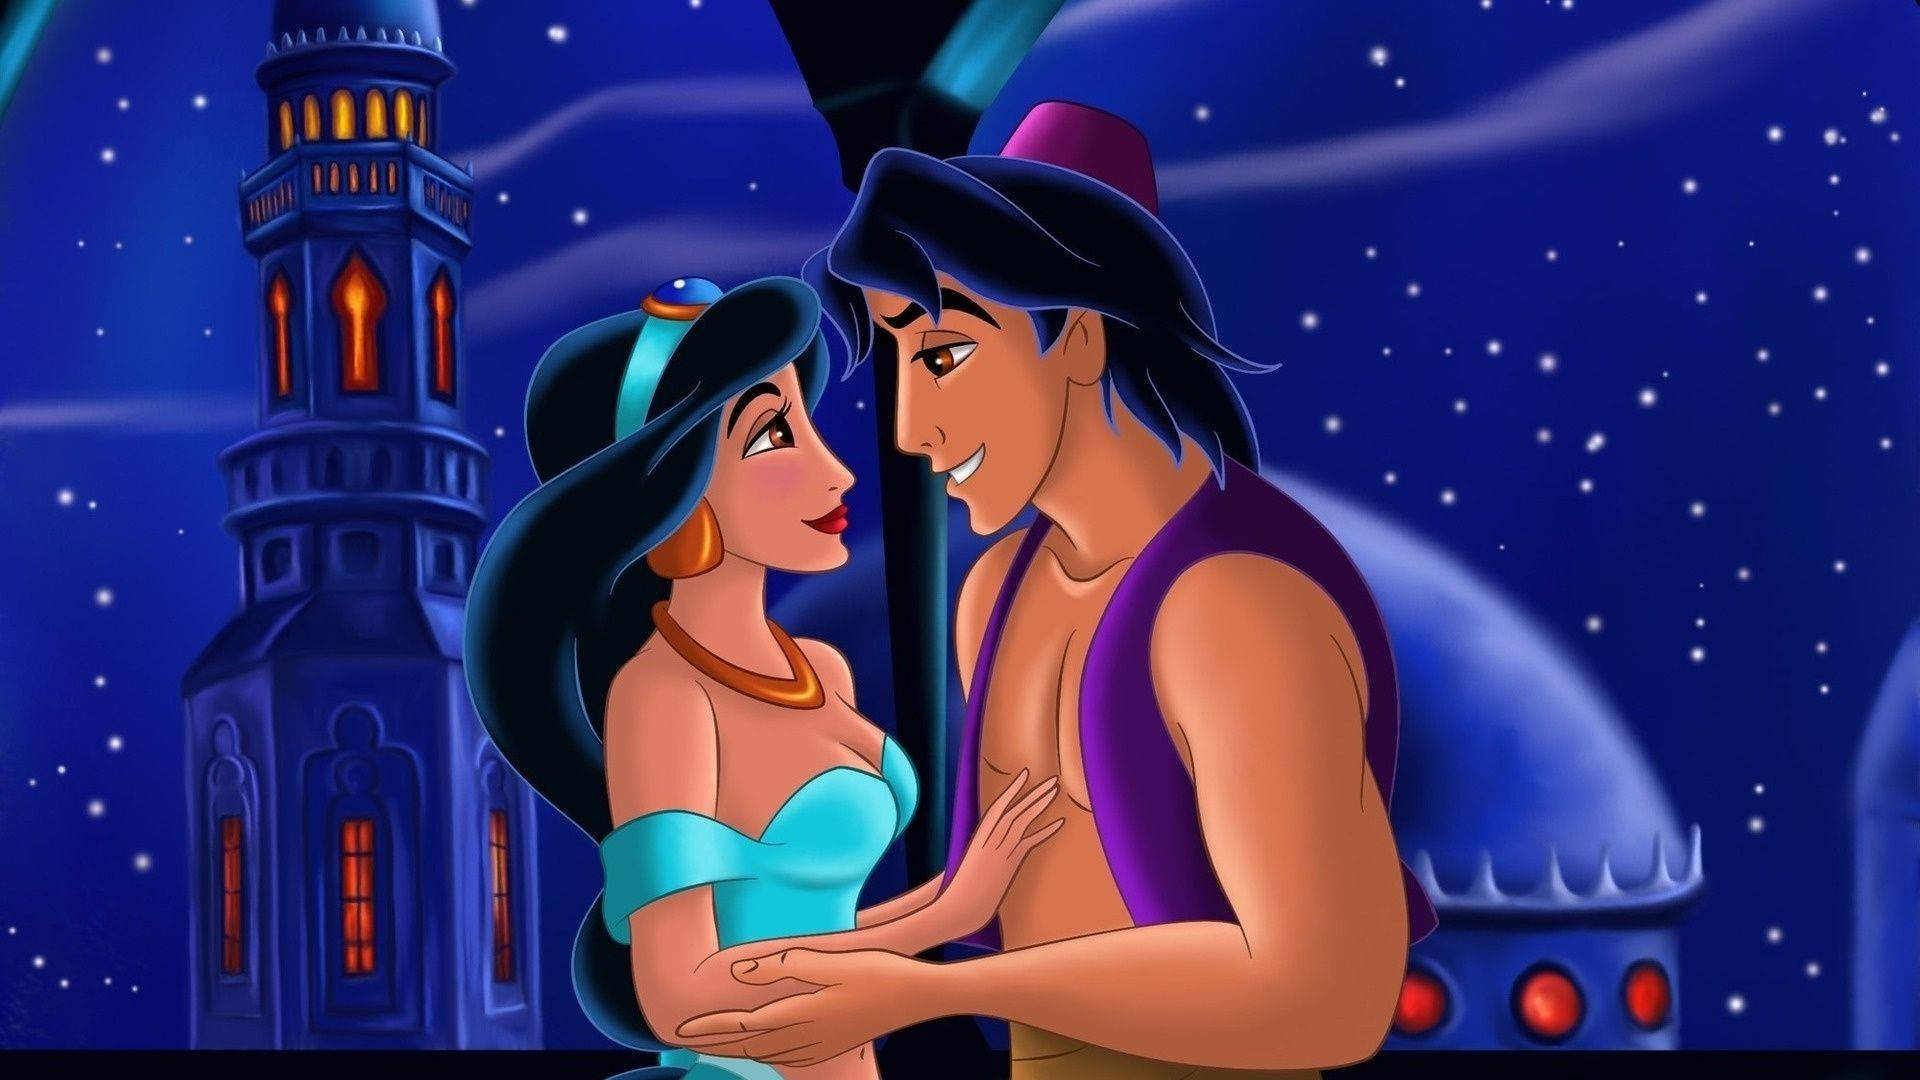 Free Aladdin Wallpaper Downloads, [100+] Aladdin Wallpapers for FREE |  